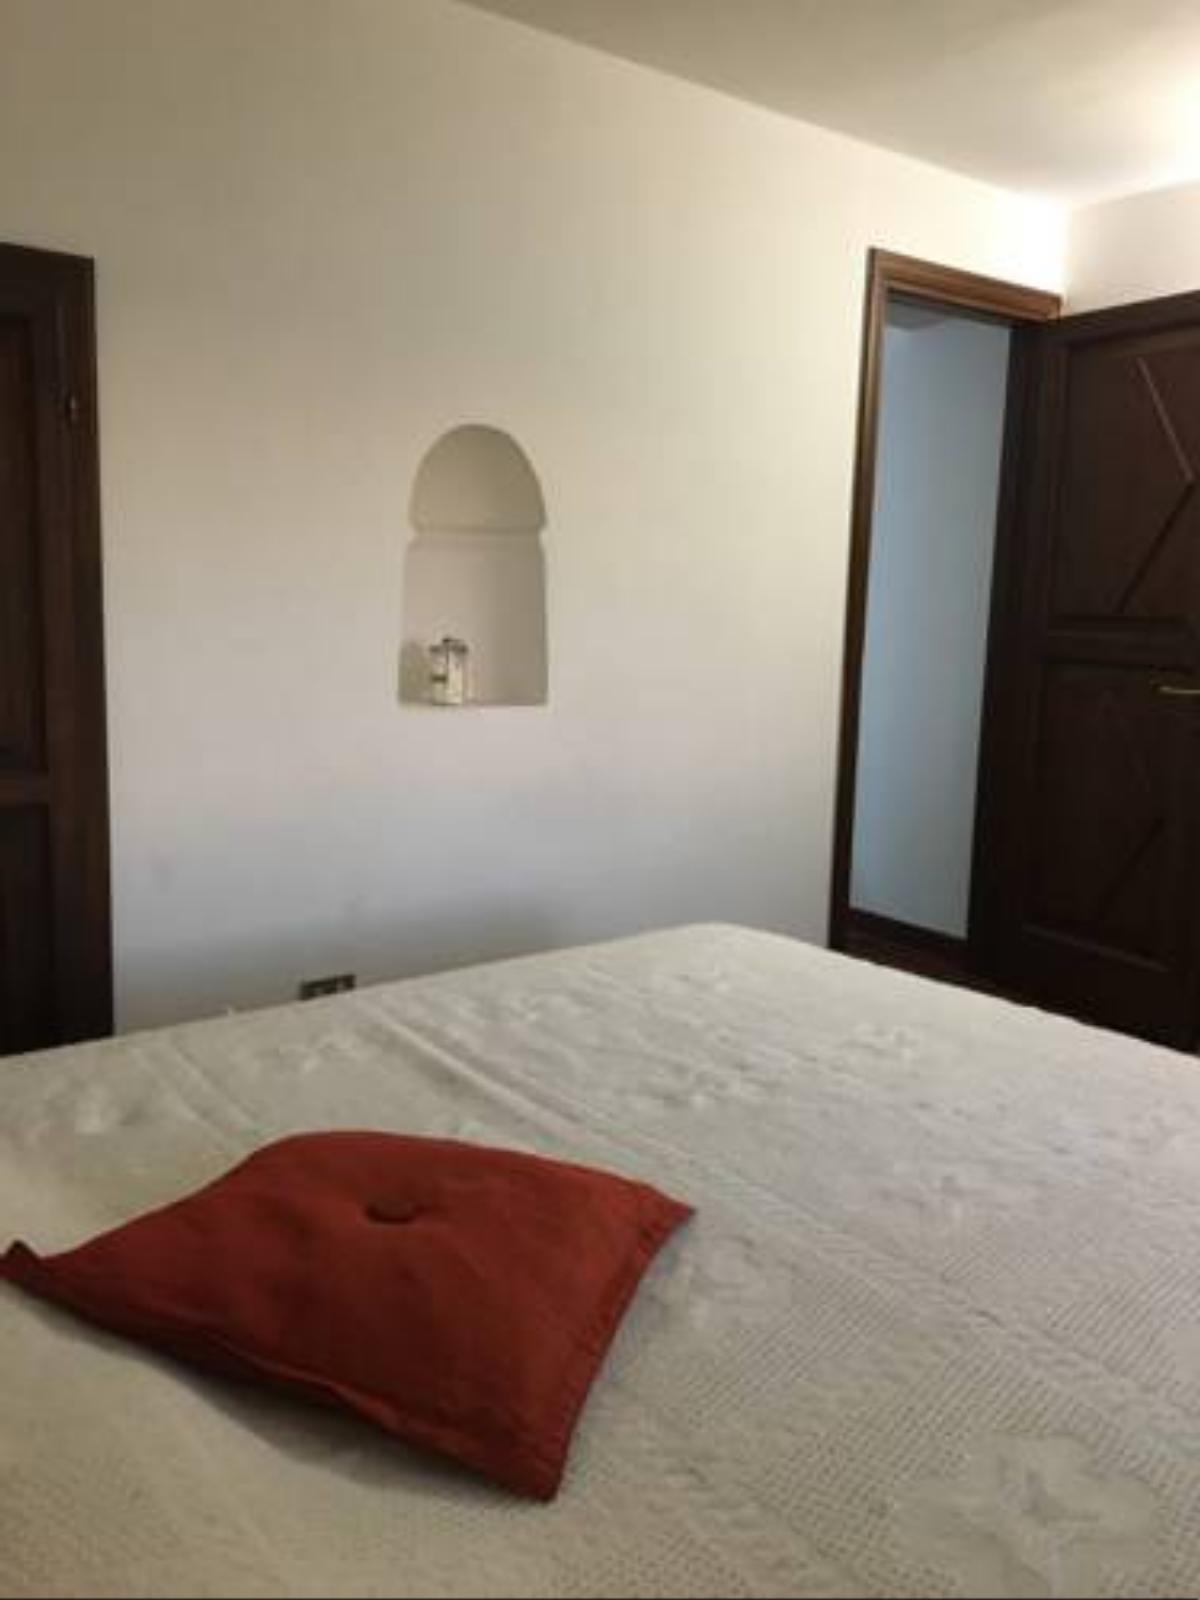 Montemarcello Holiday Home Hotel Ameglia Italy